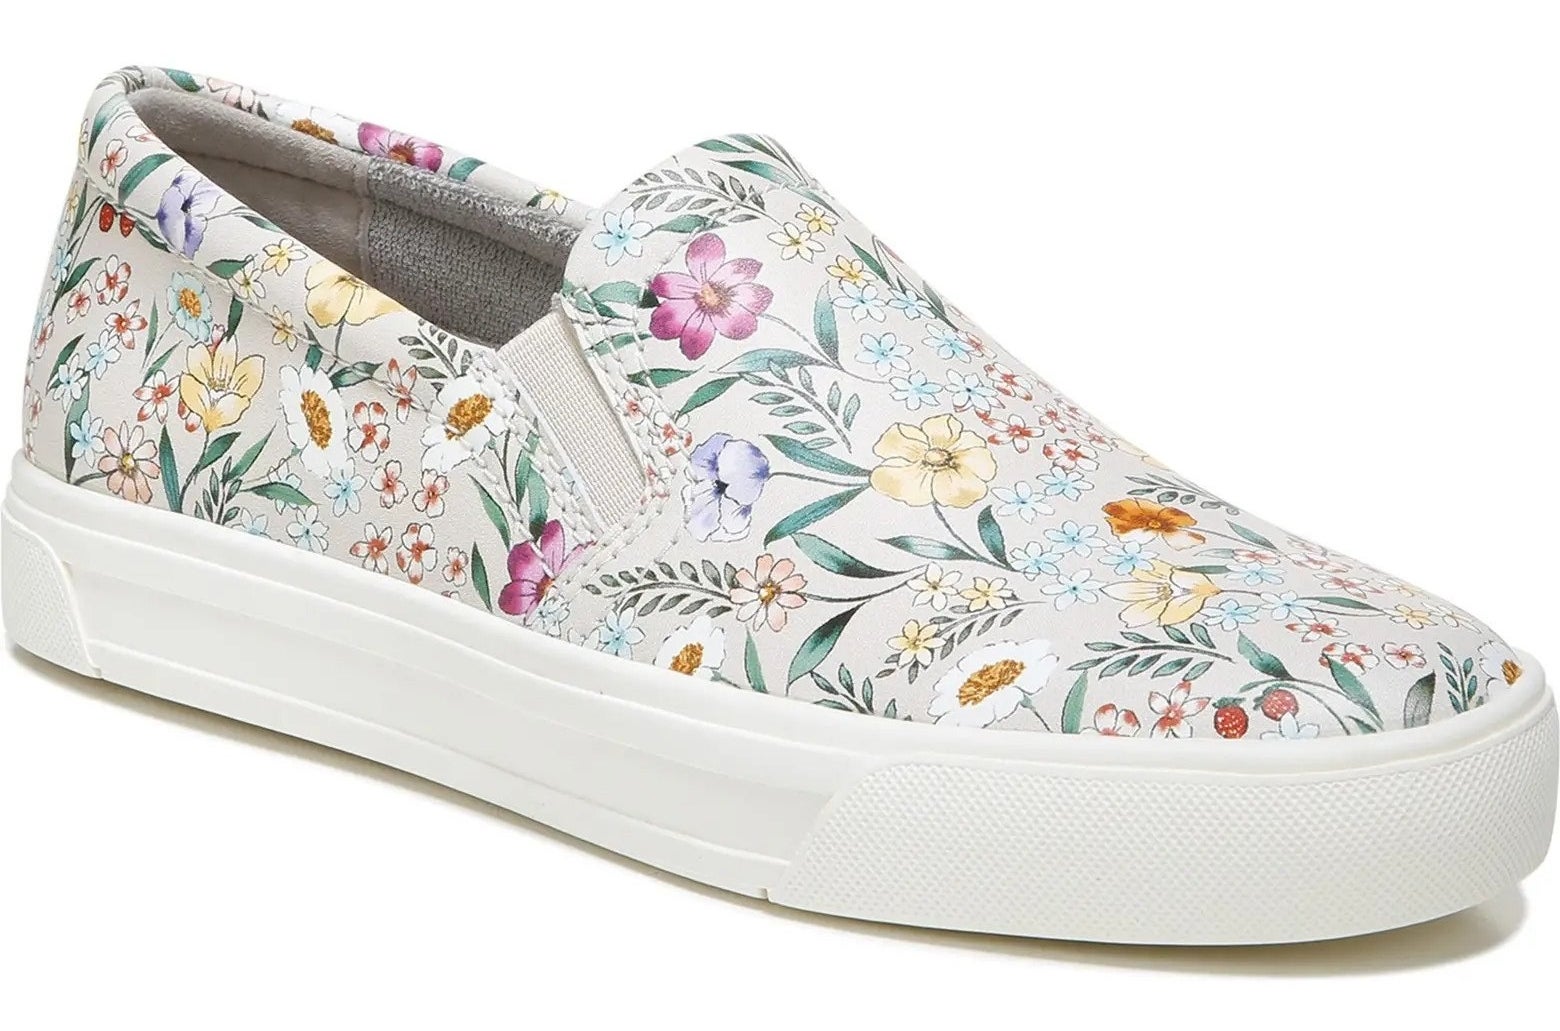 lace free sneakers with floral pattern on canvas fabric